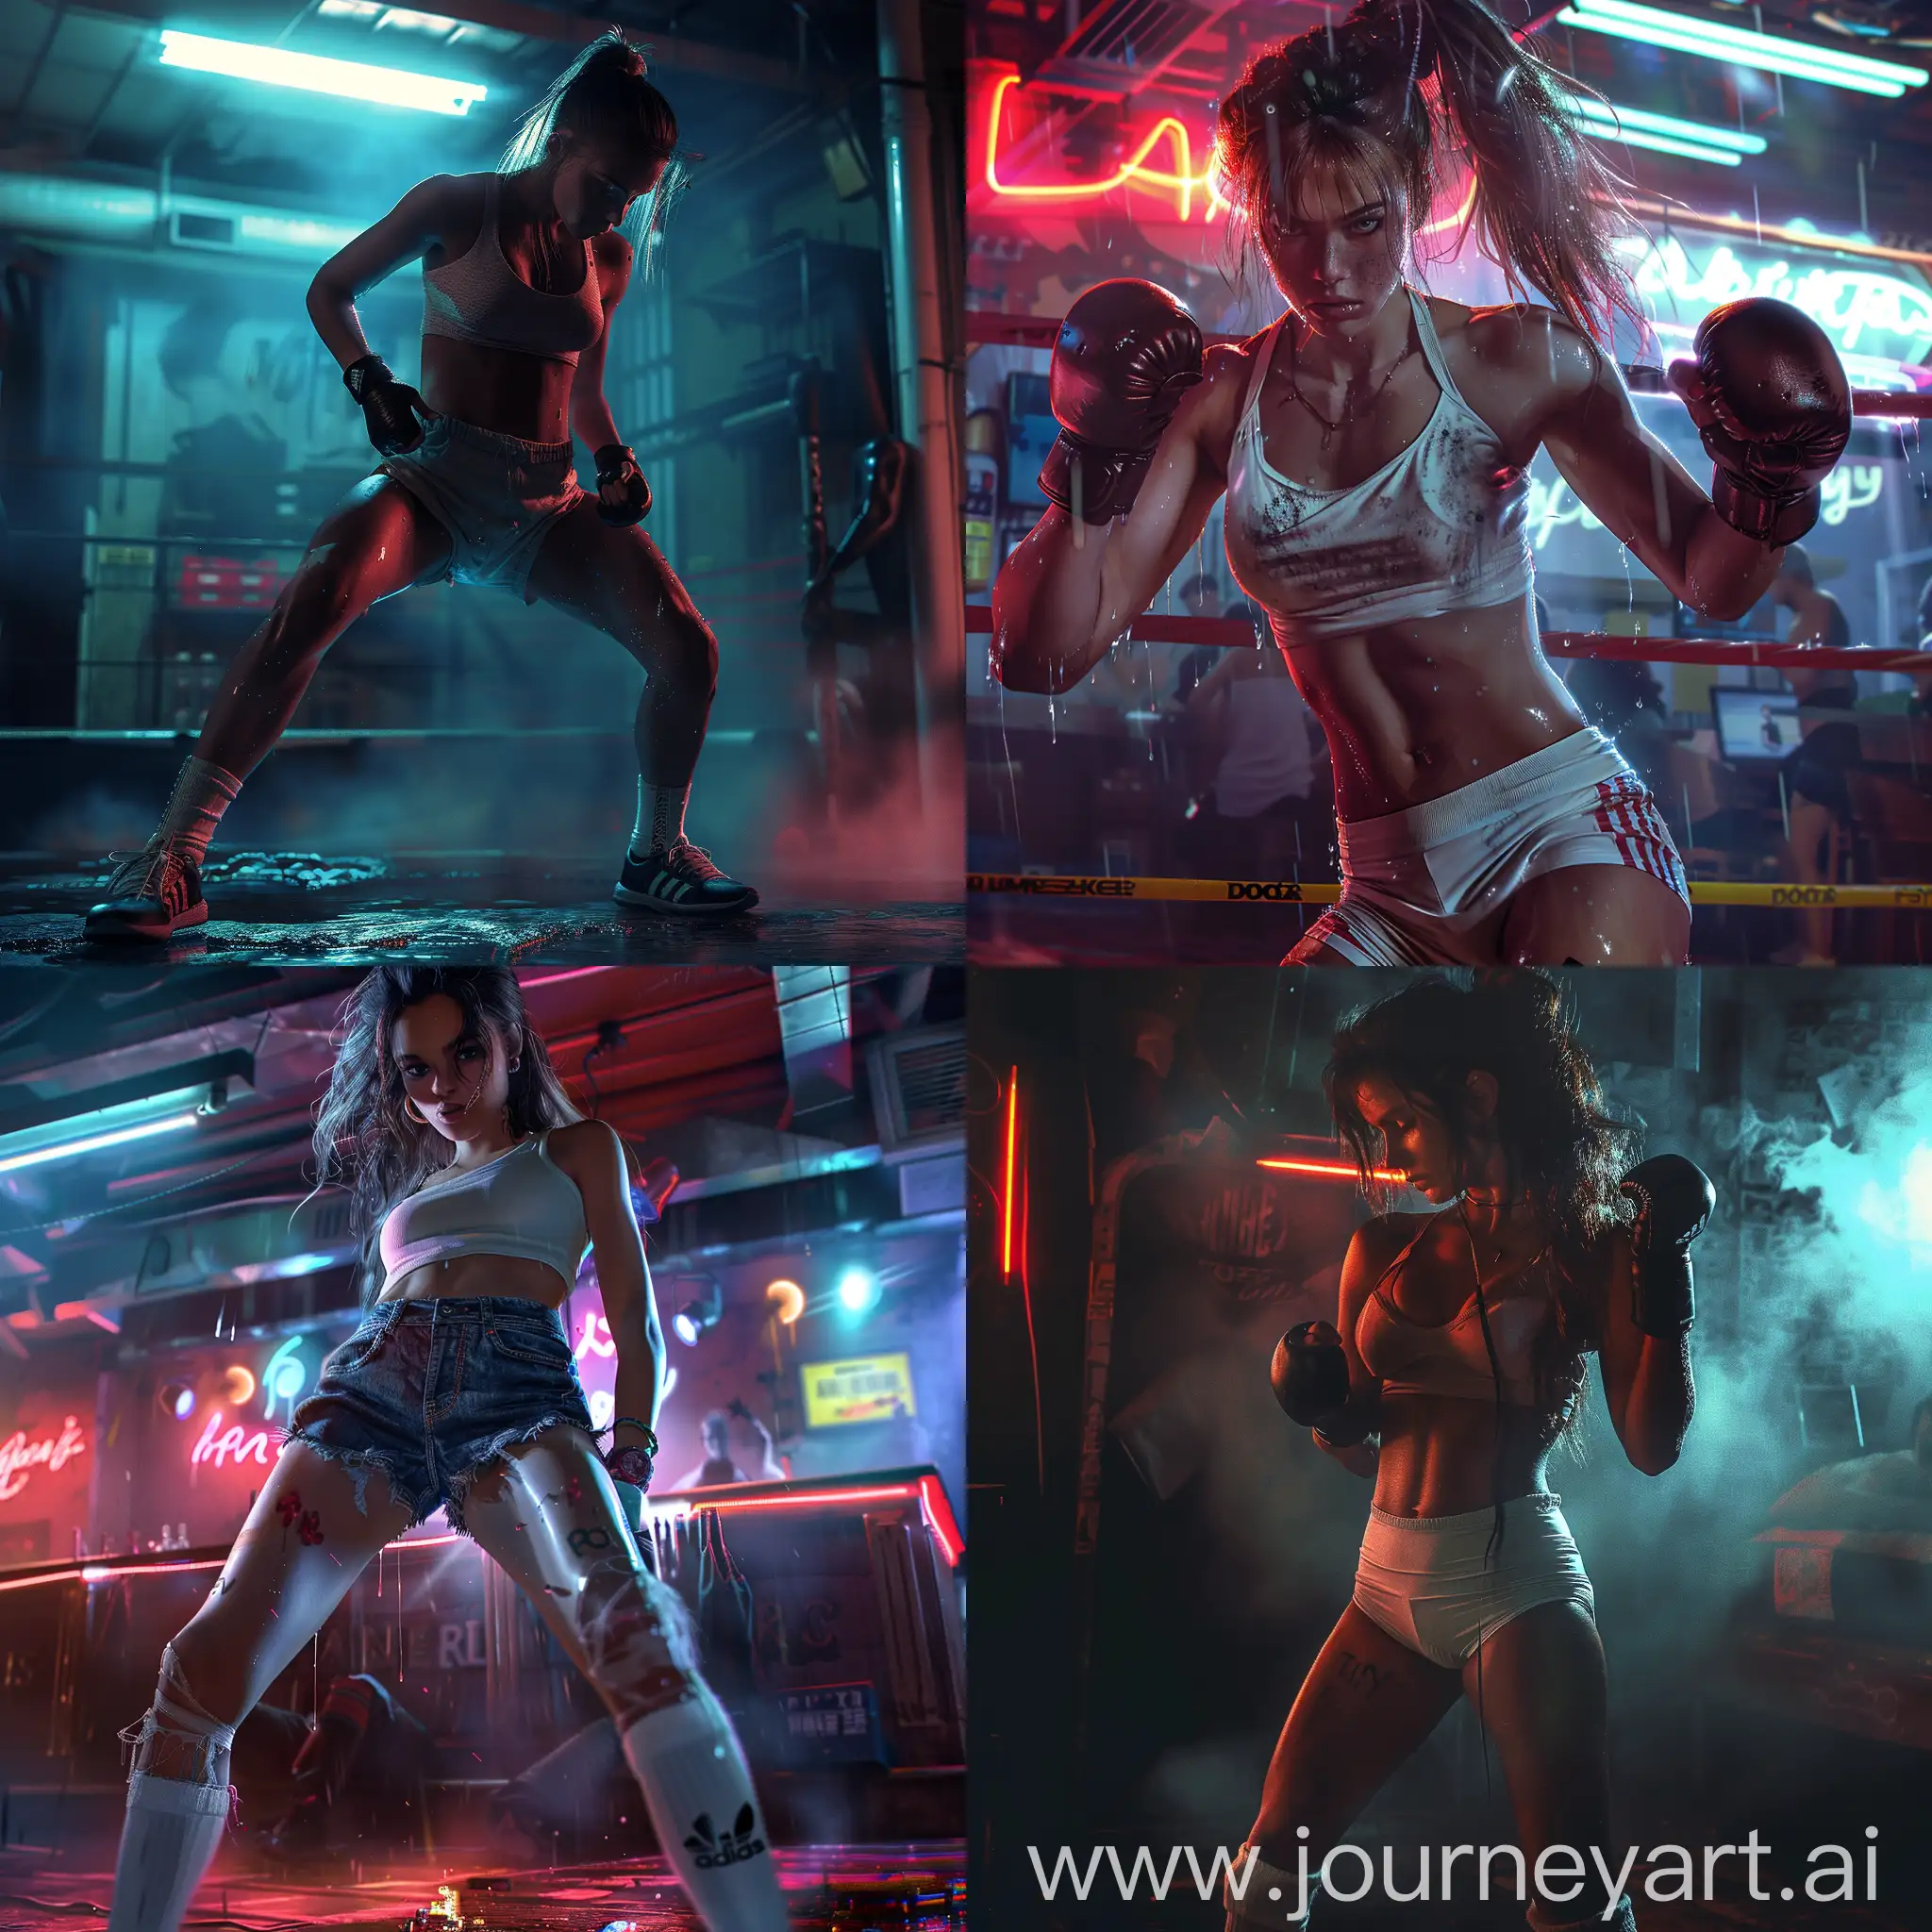 Night club. A 19 y.o. very muscular female bouncer in (shorts and (adidas  white overknee socks))) prepare to fight. Realistic style, dramatic lighting, intense action scene.